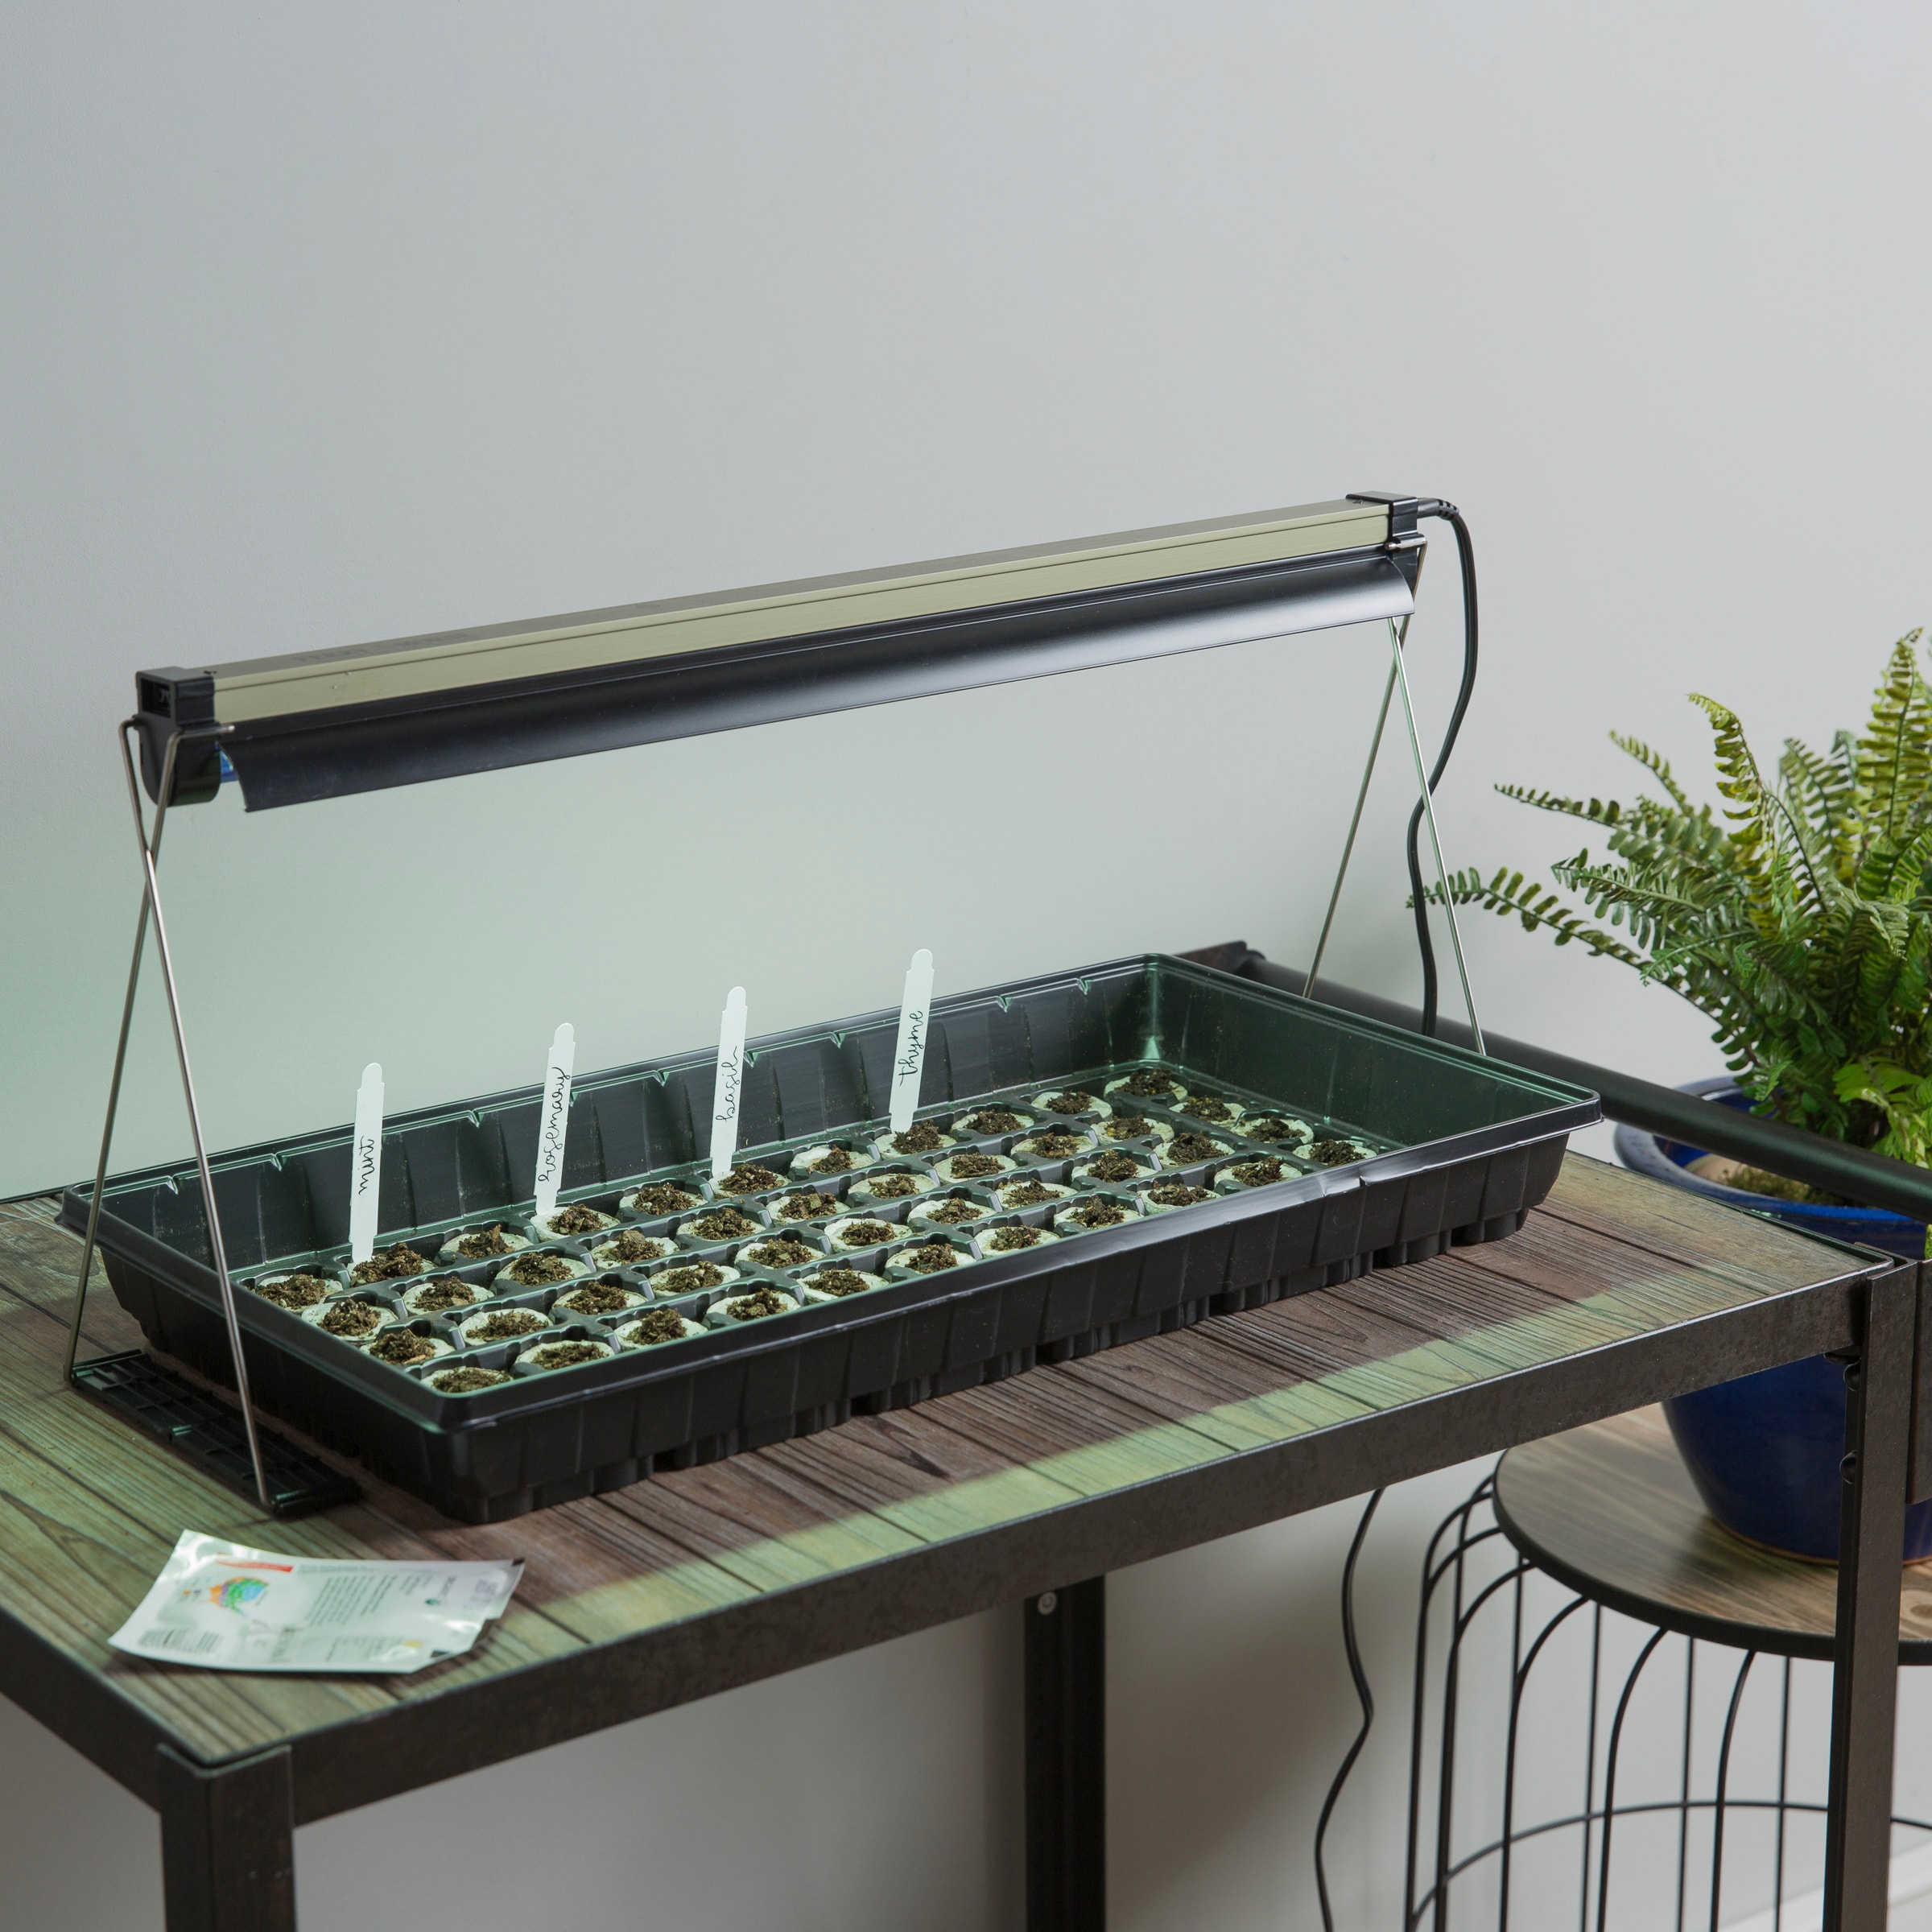 Ferry~Morse Heat Mats and Grow Lights Make Germinating Seeds Indoors Easy –  Ferry-Morse